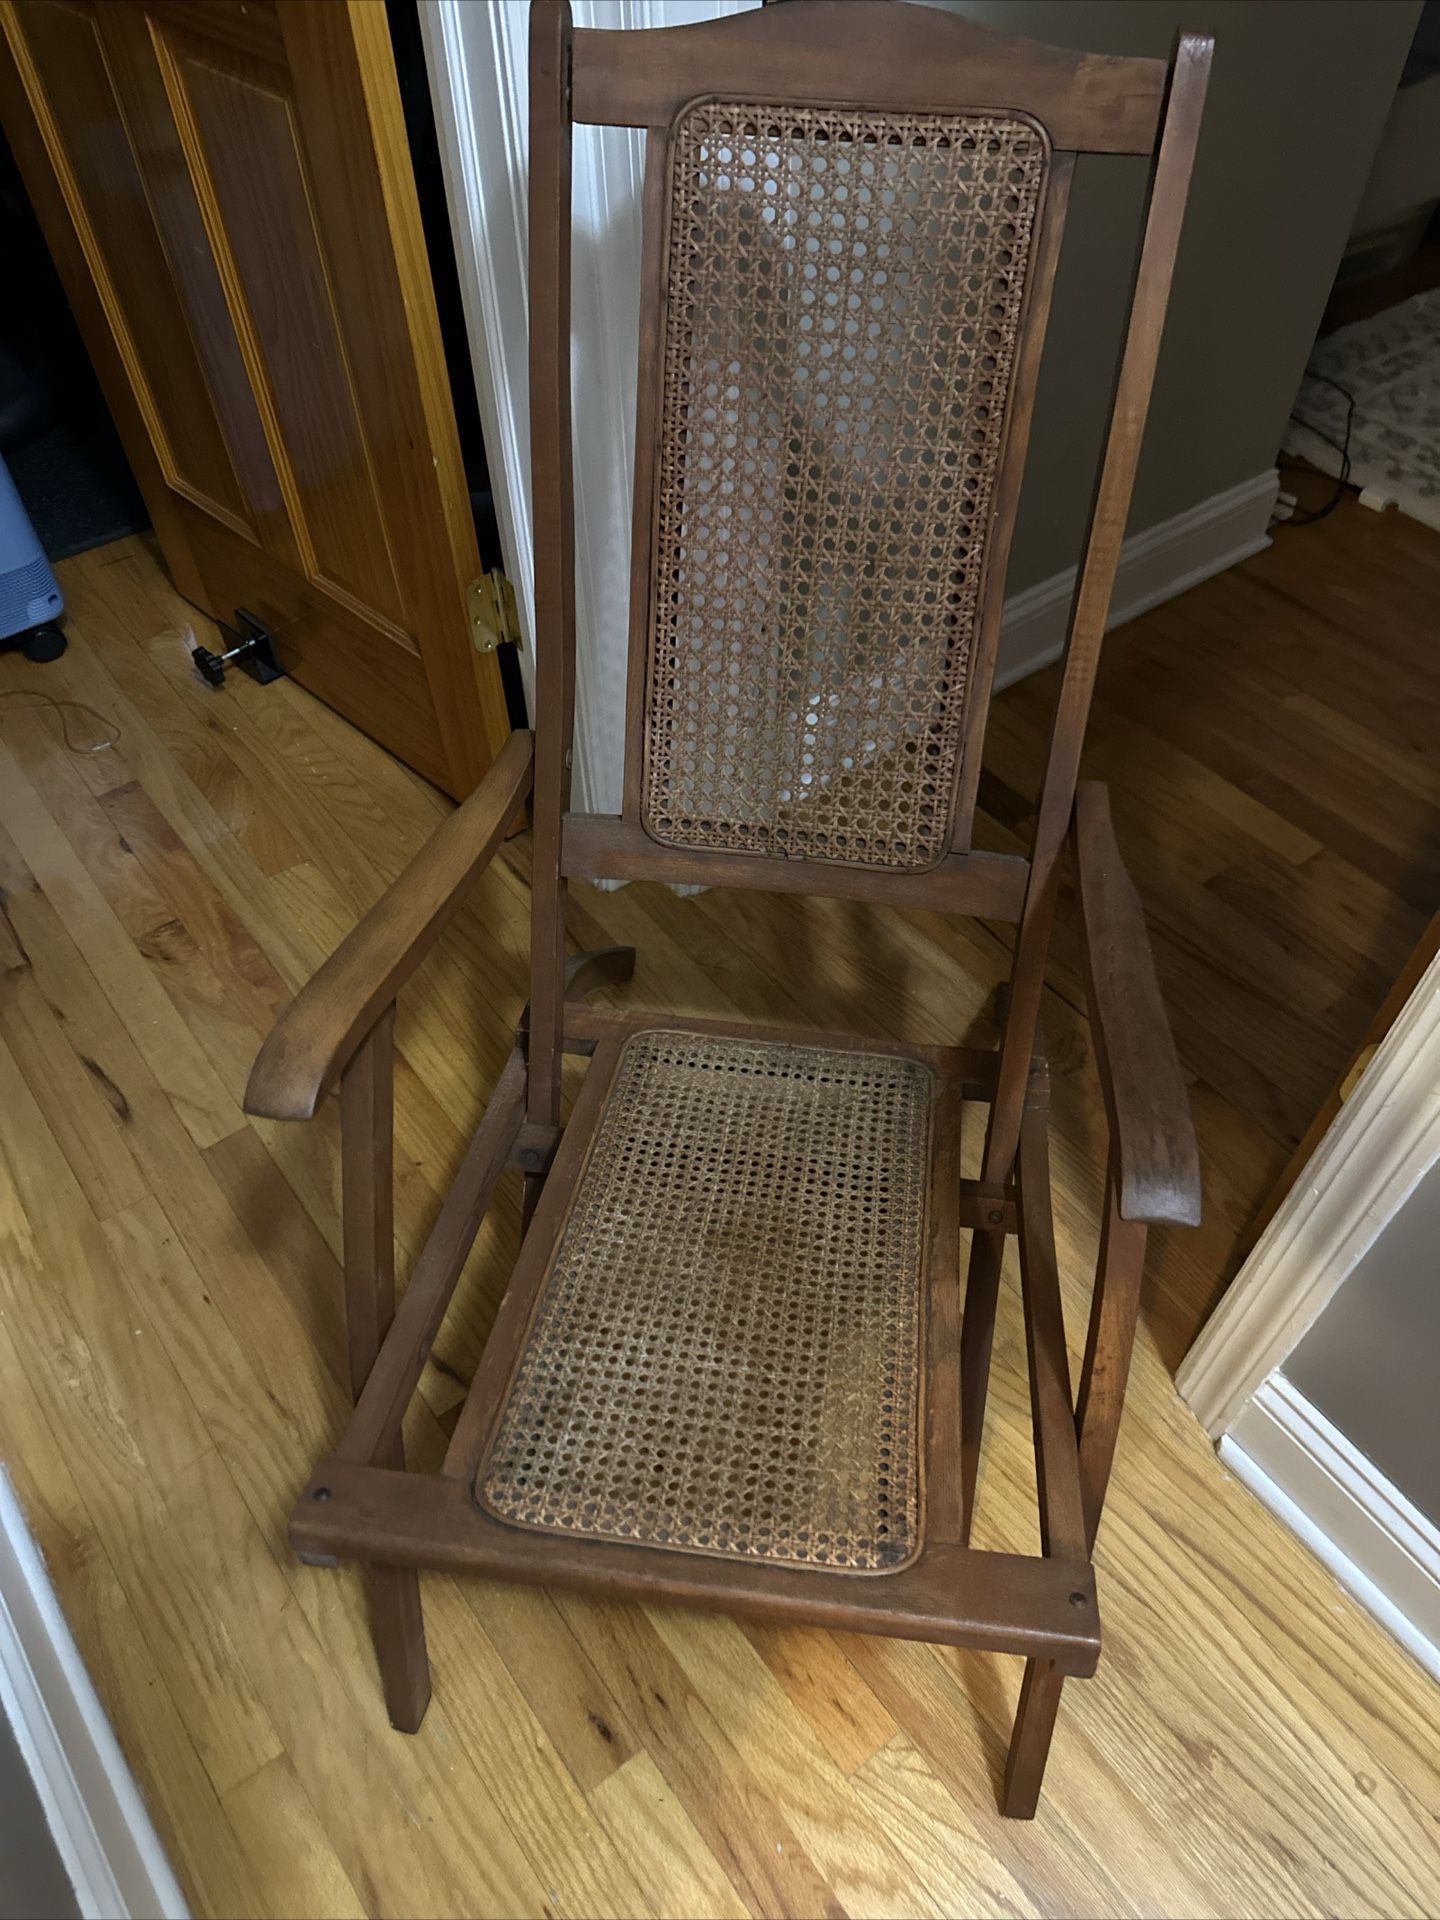 Antique Deck Chair From Old Steamship 100 Plus Years Old!!